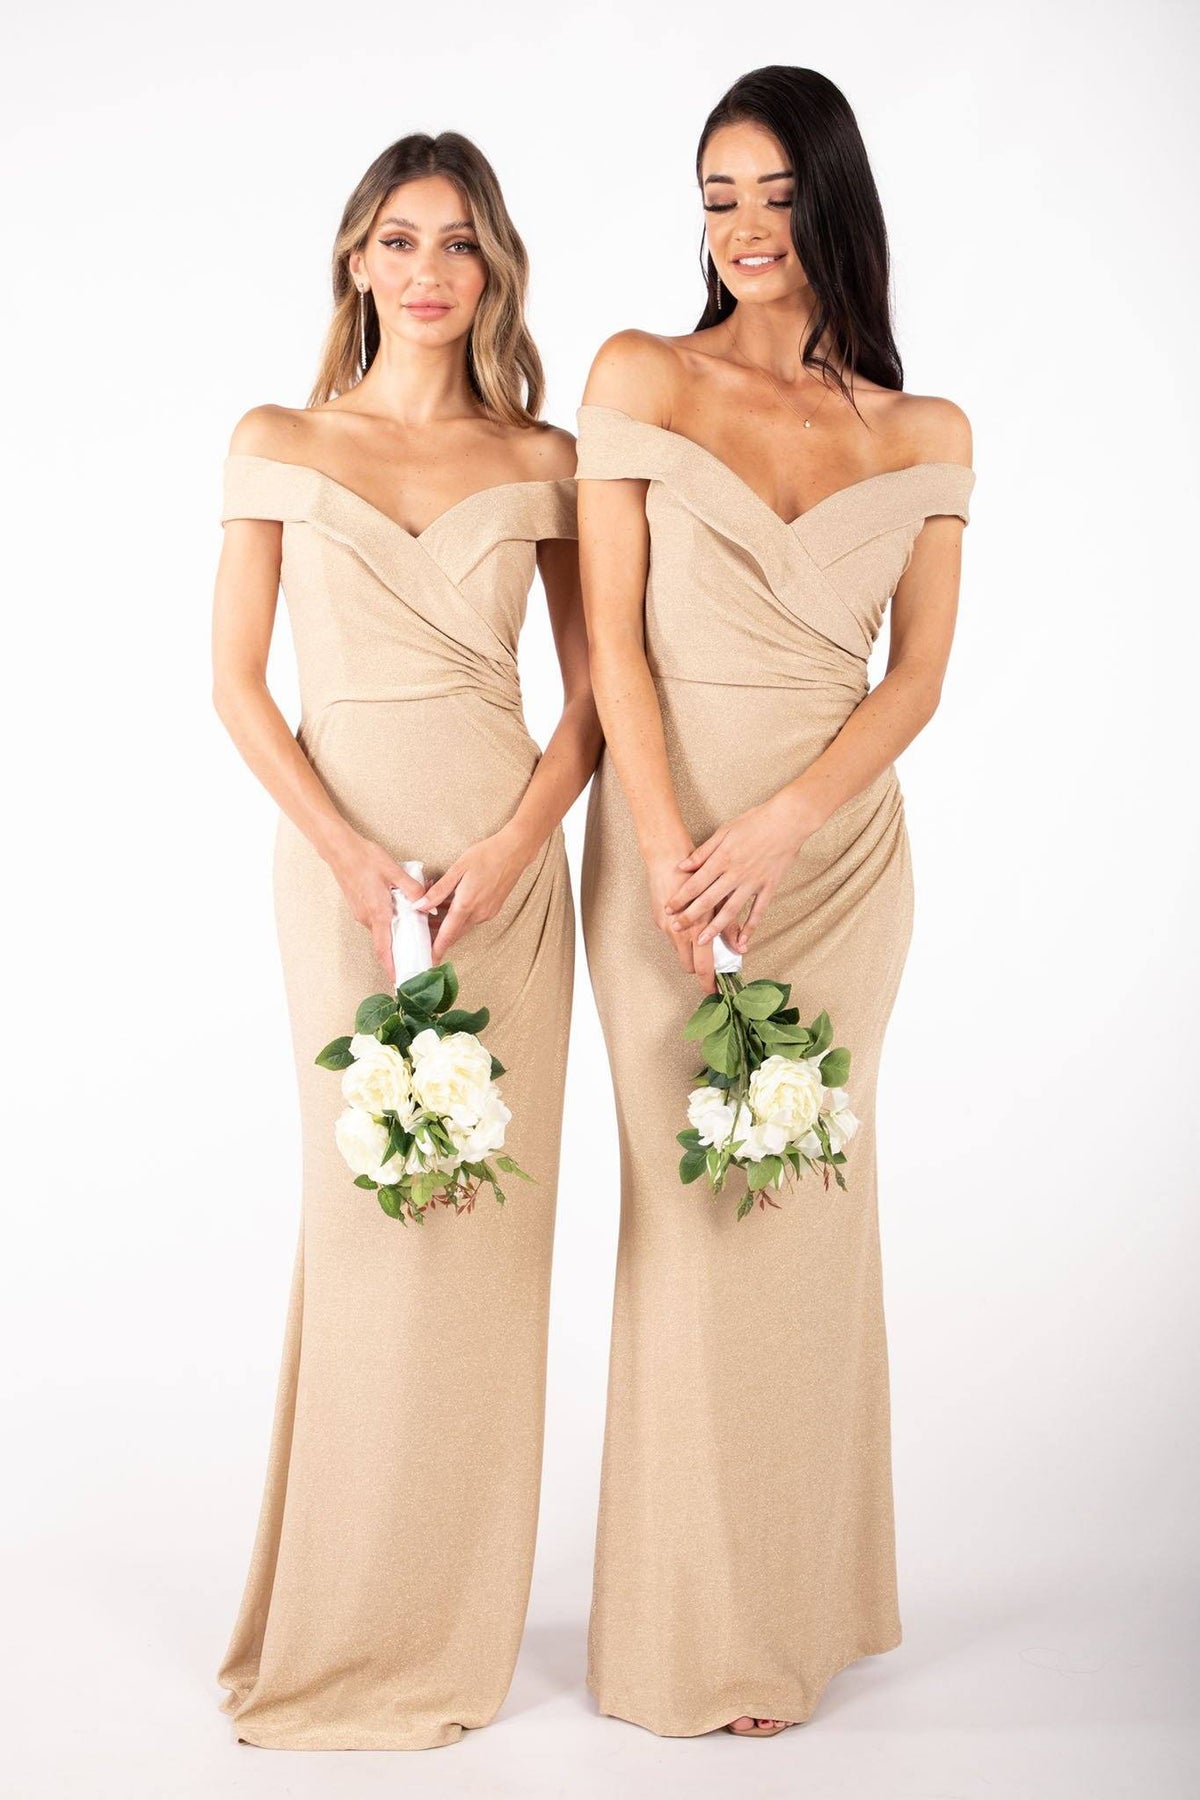 Gold glitter bridesmaid maxi dress with off-the-shoulder sweetheart neckline and gathering detail